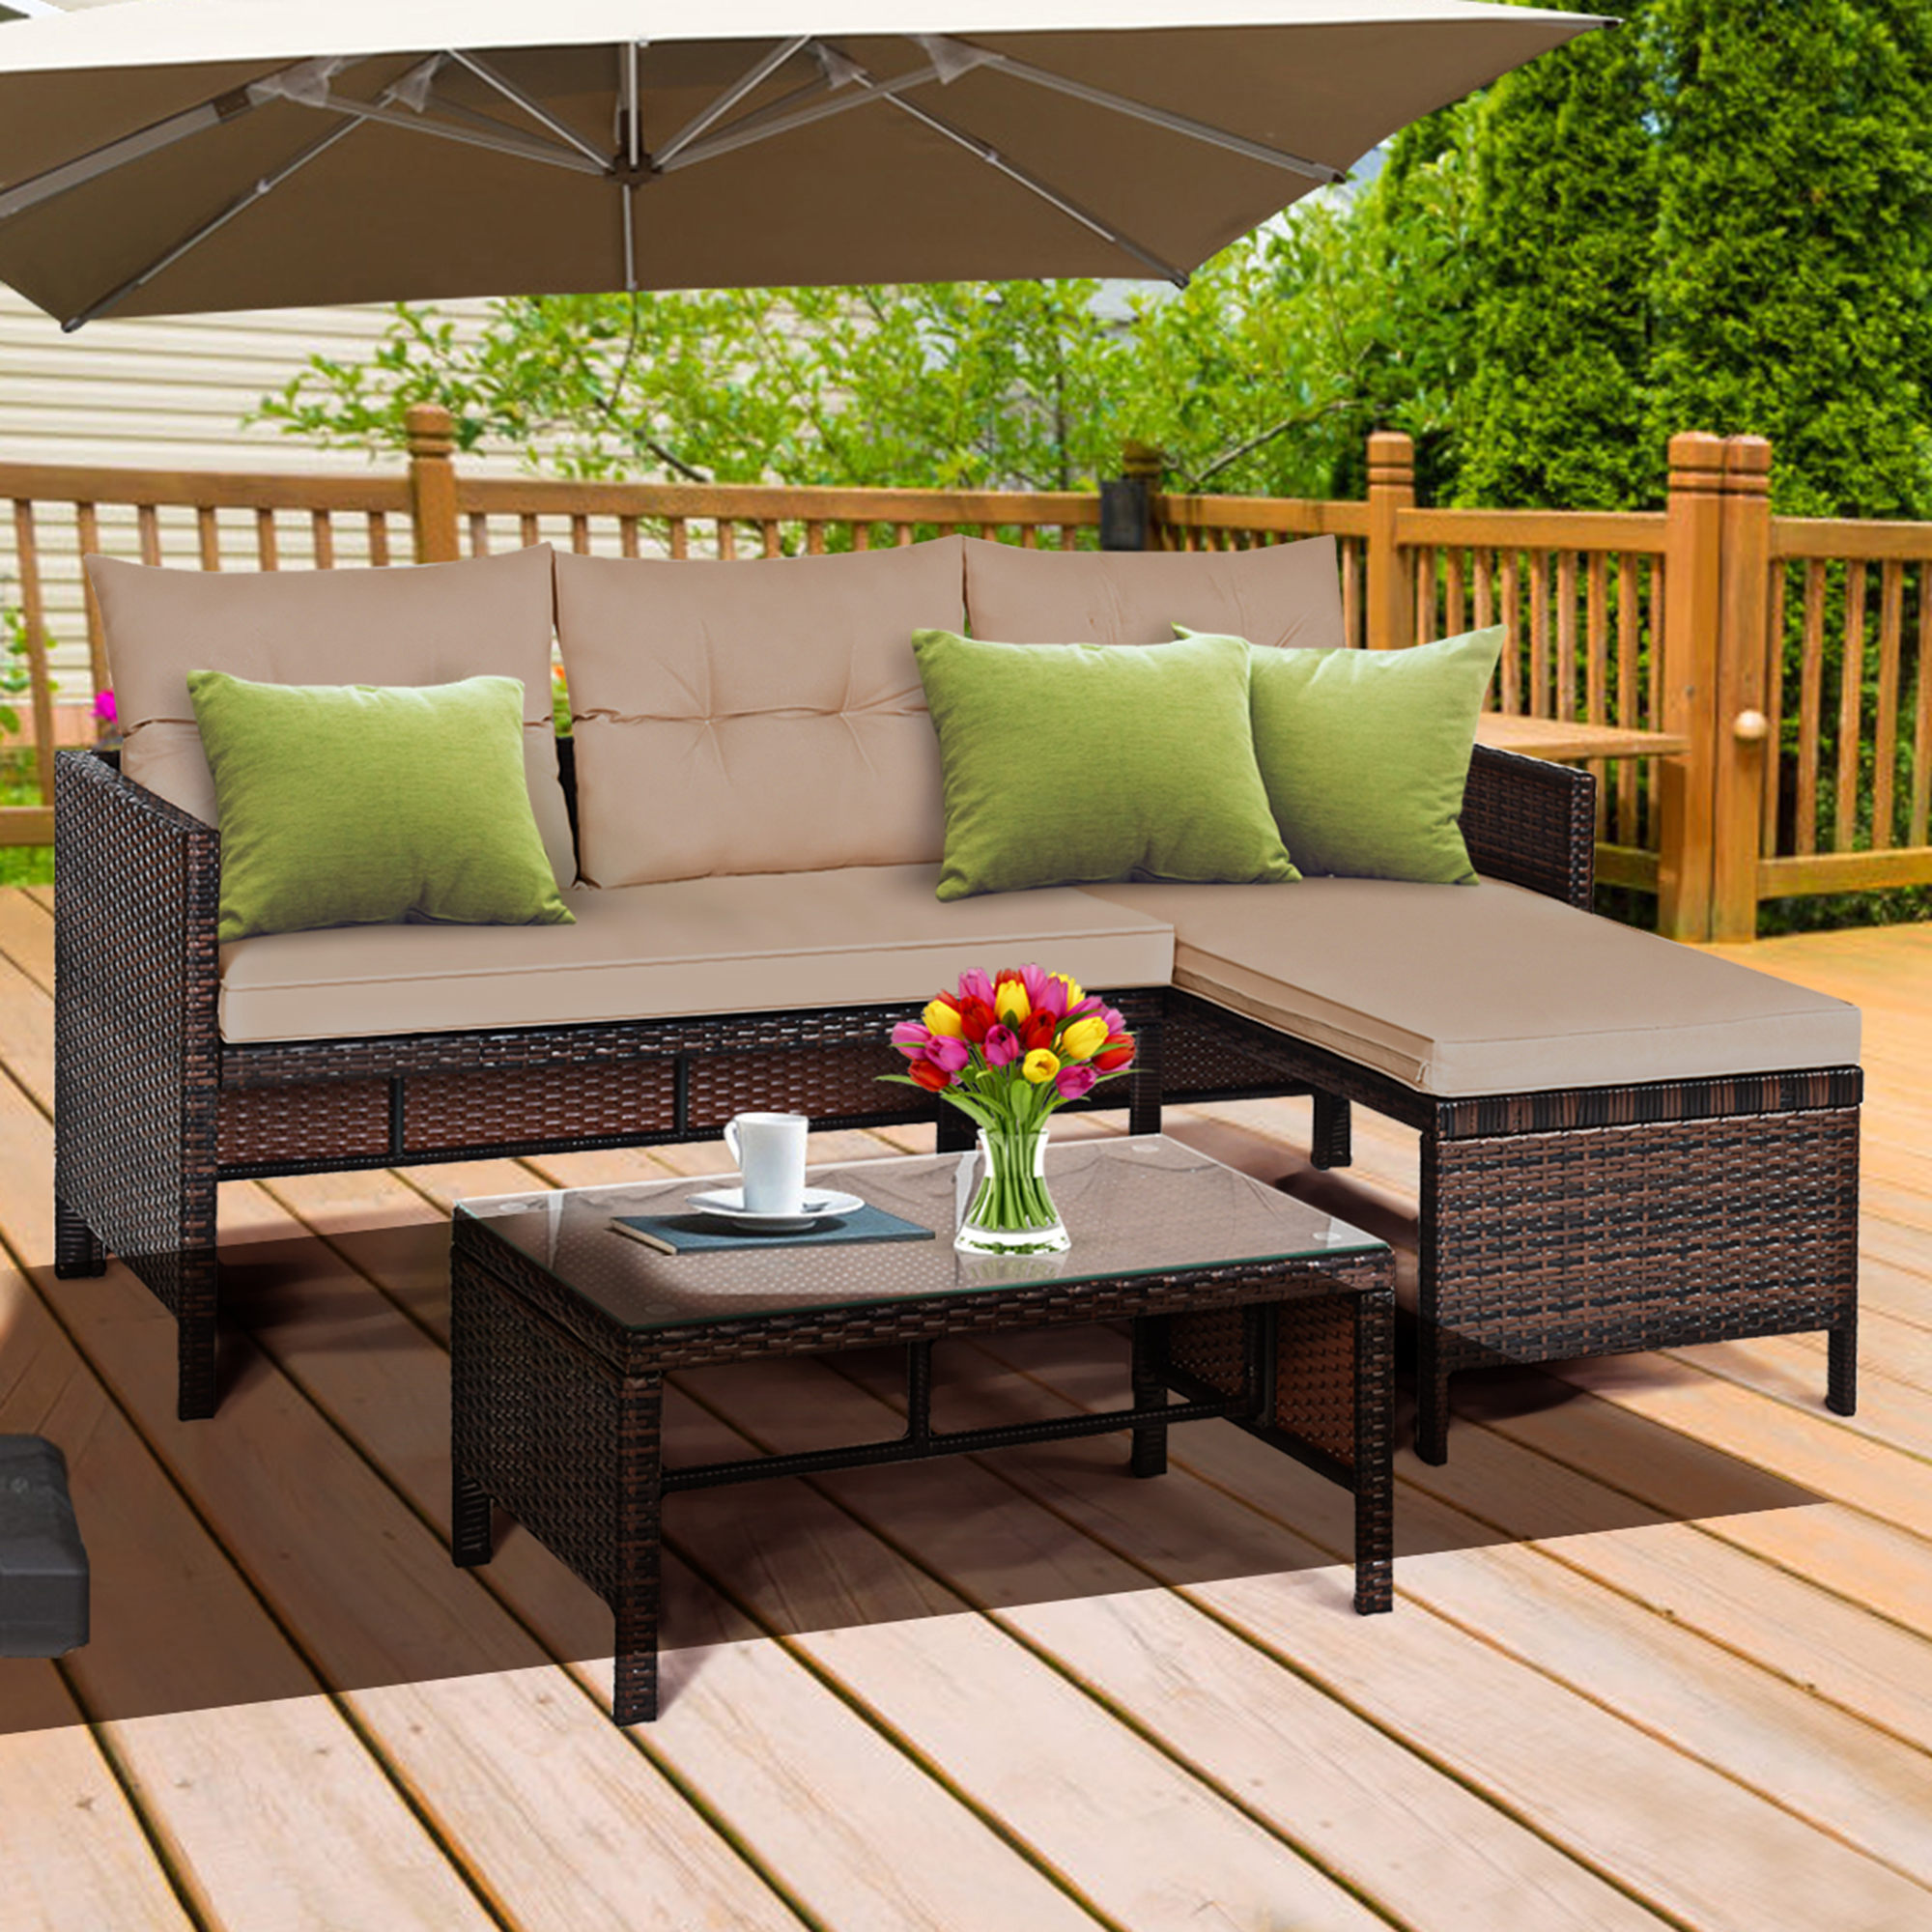 Gymax 3PCS Outdoor Rattan Furniture Set Patio Couch Sofa Set w/ Coffee Table - image 1 of 10